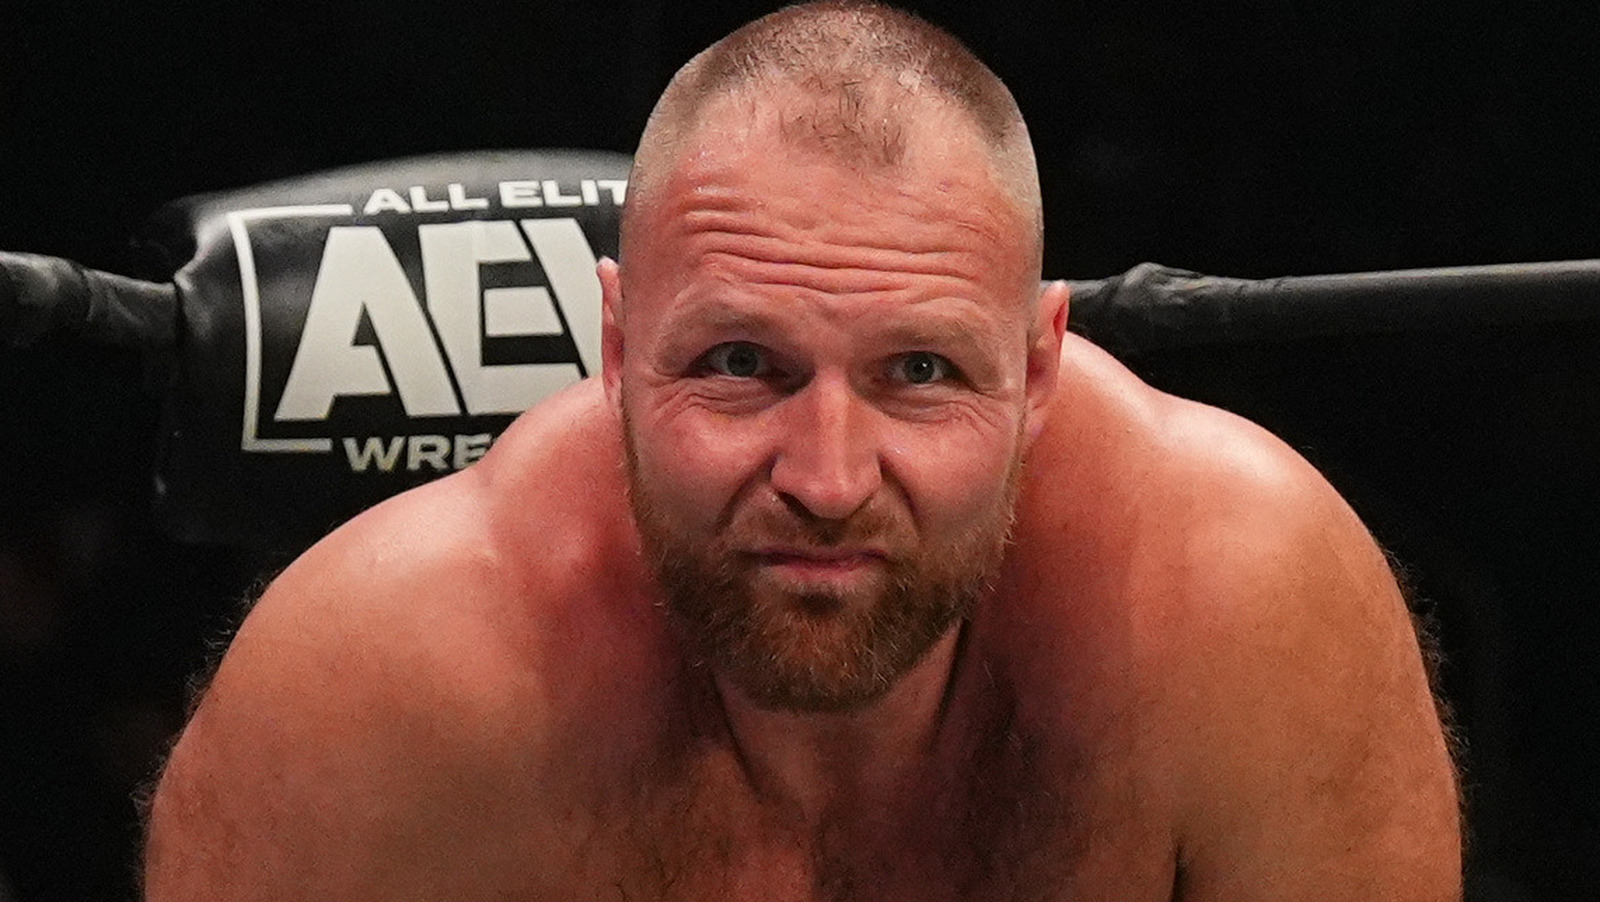 Bryan Danielson And Jon Moxley Clash To Crown New AEW World Champion - Wrestling Inc.